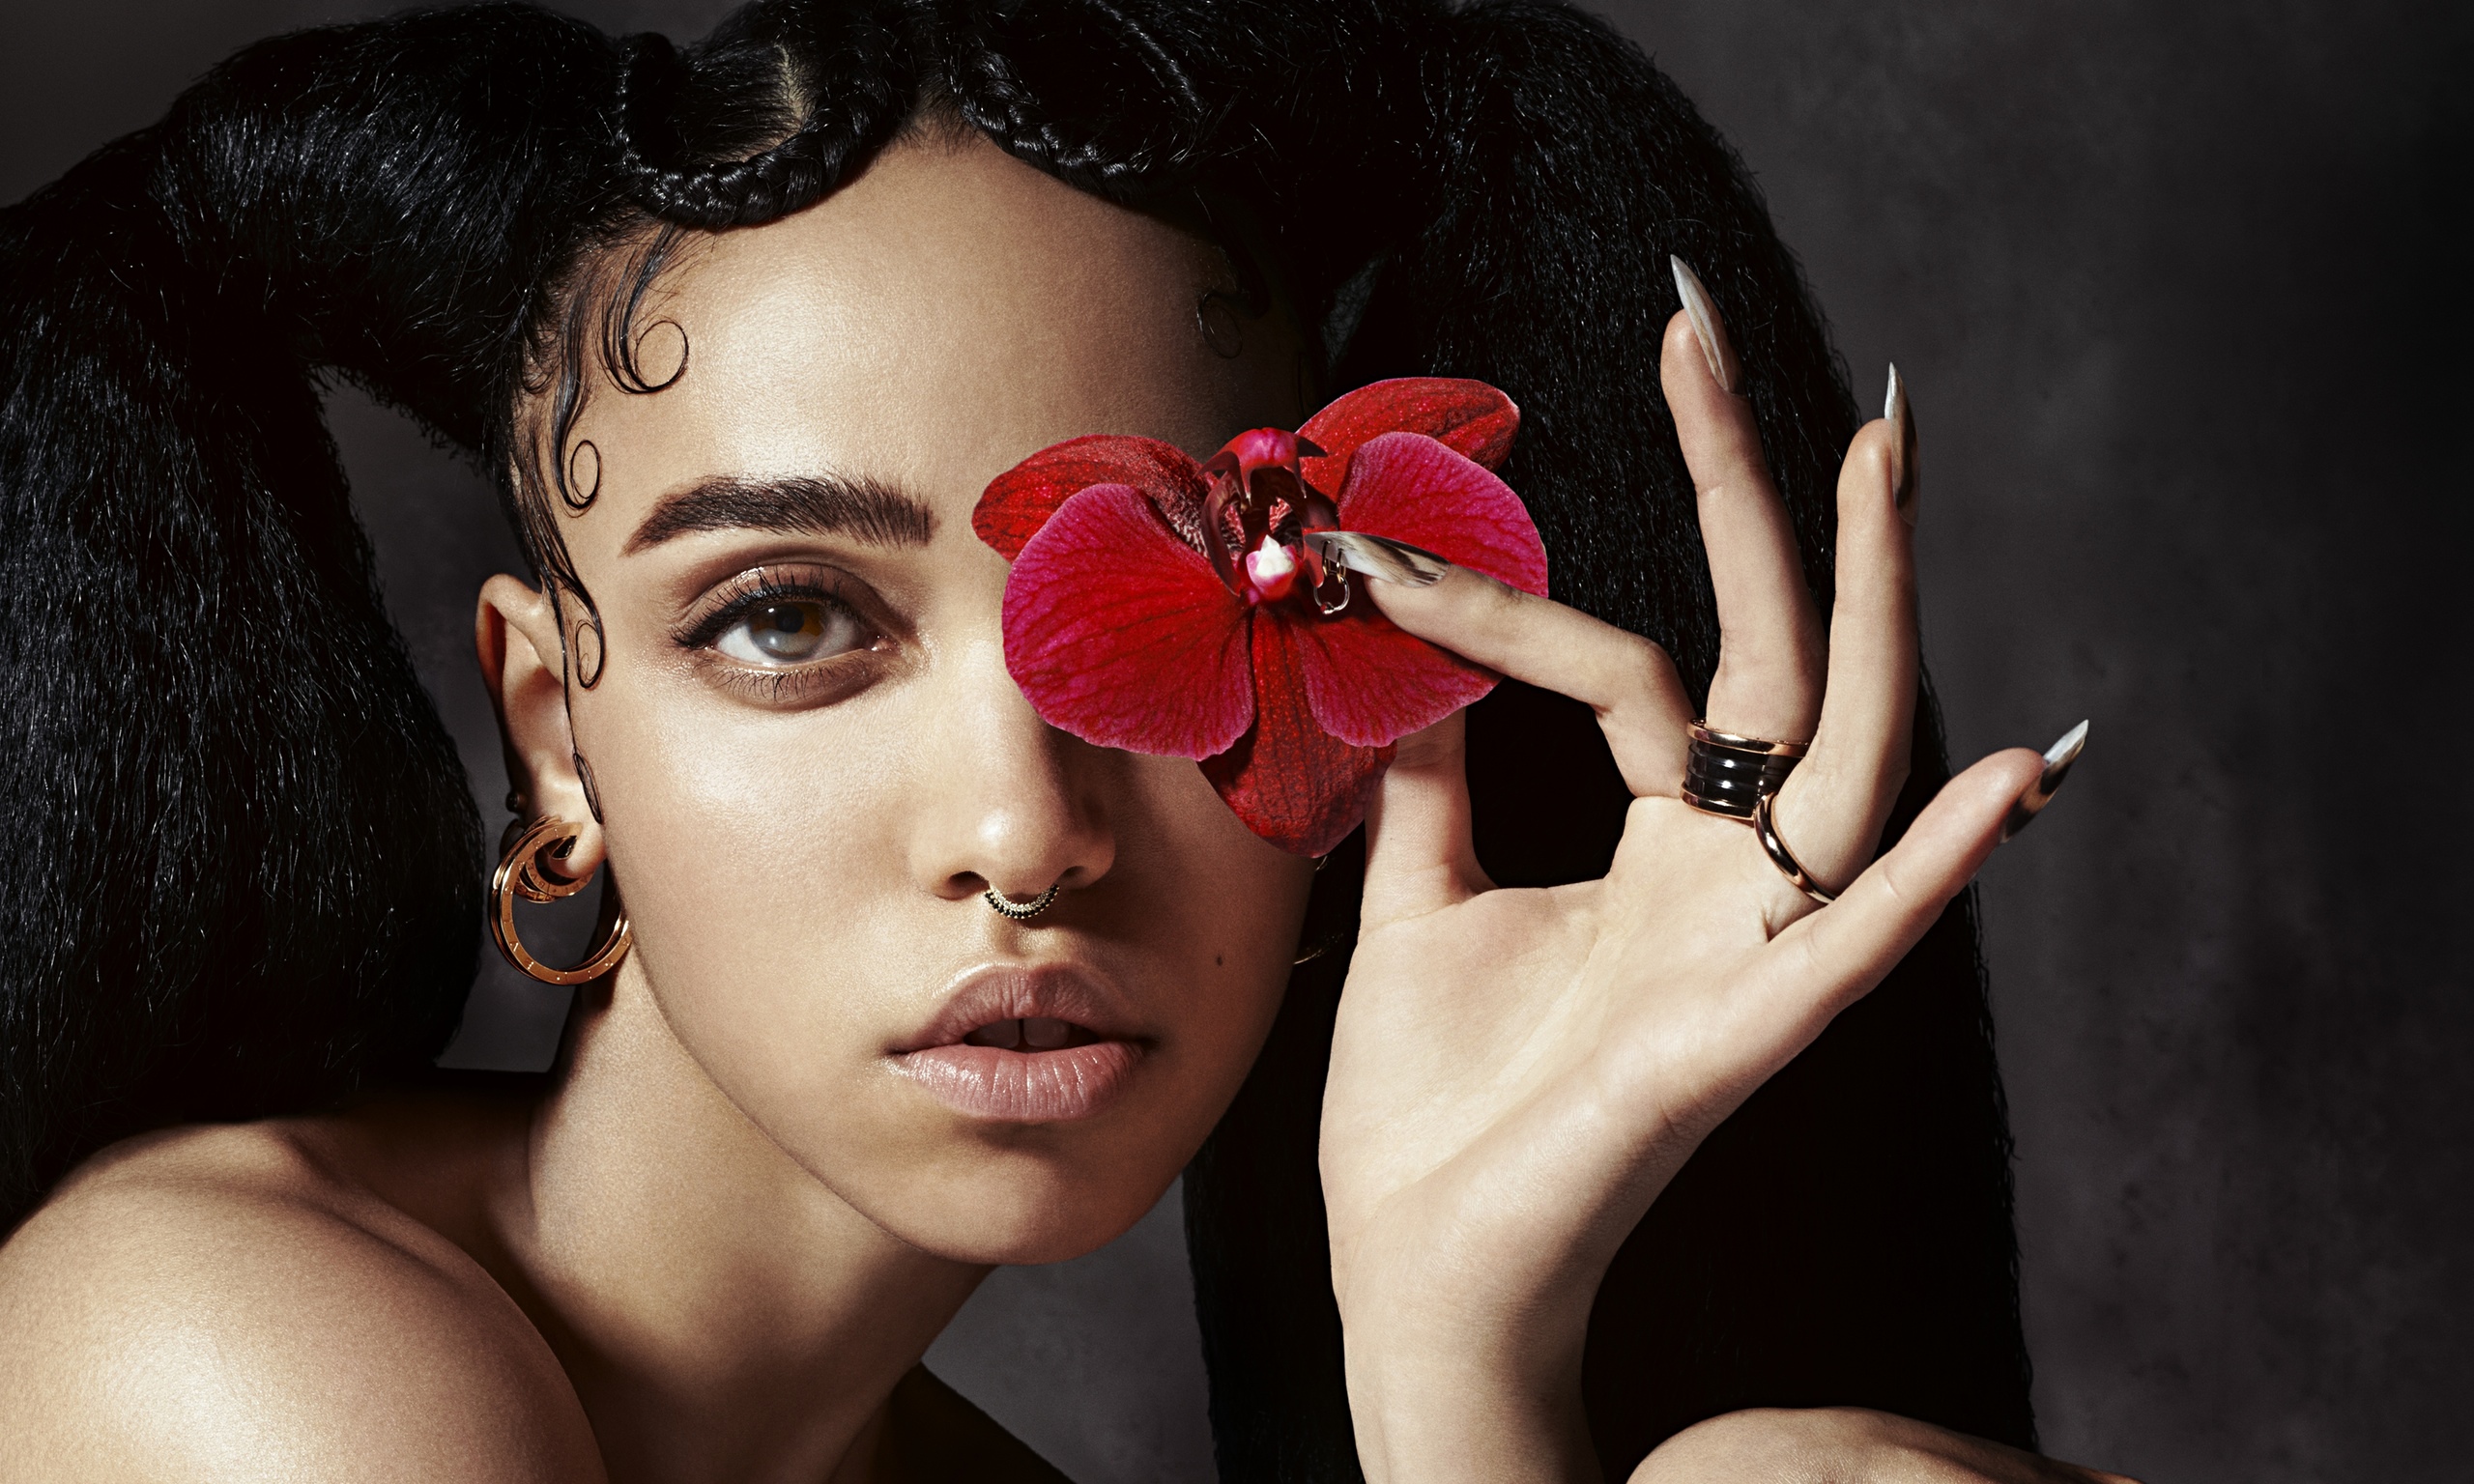 FKA twigs Teases Possible New Album With New Single Dropping